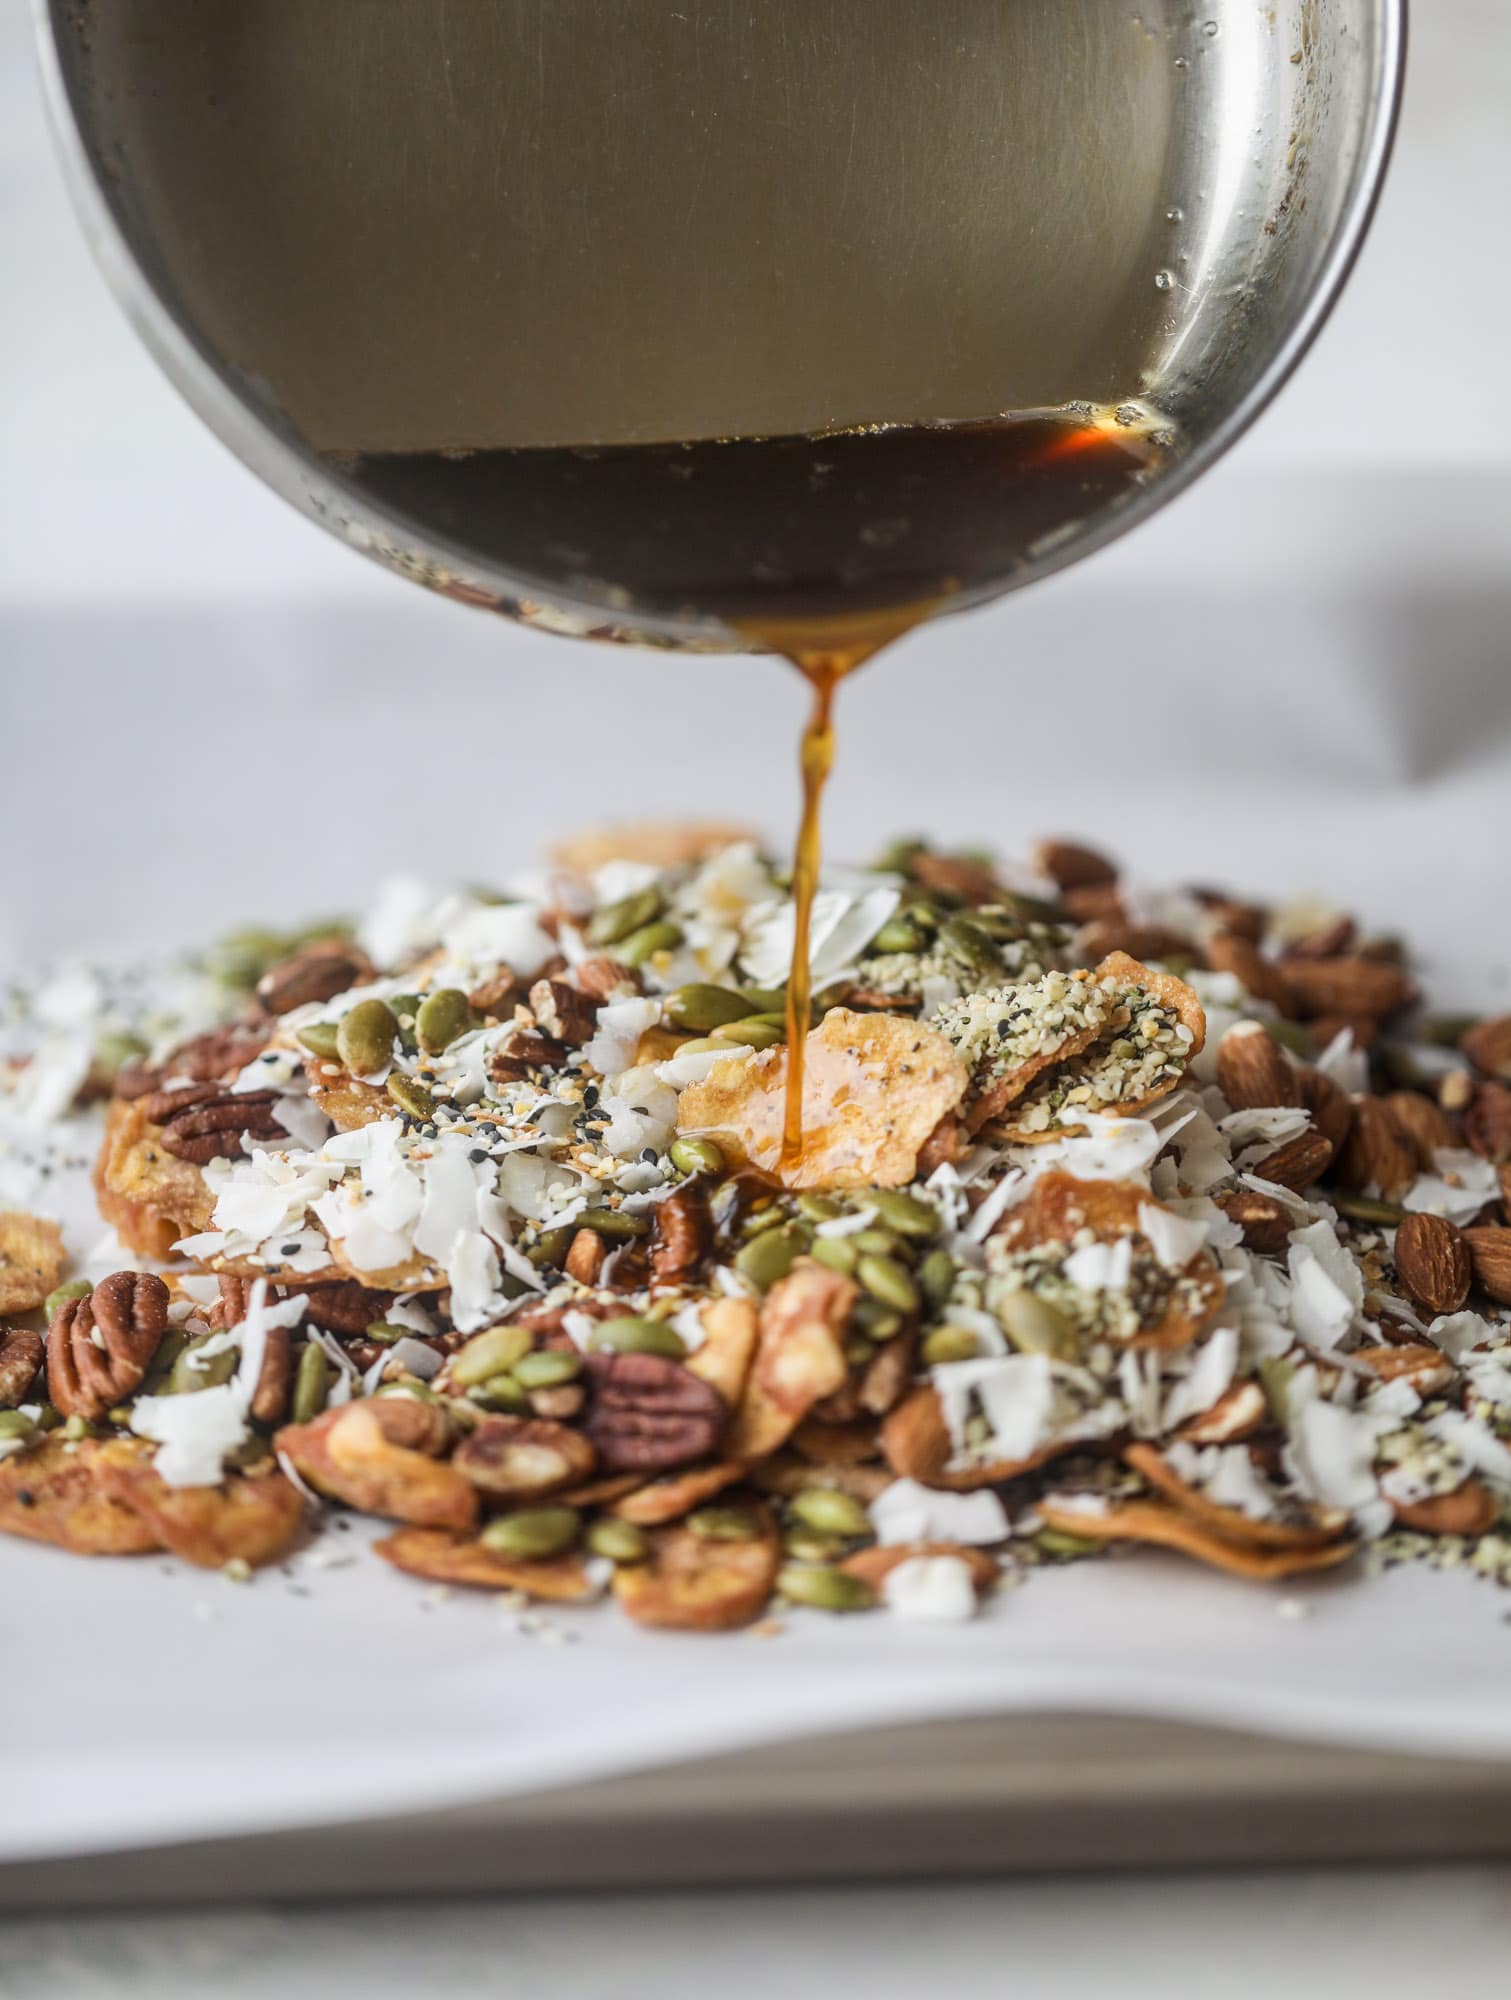 This delicious healthy snack mix is perfect to prep for snacks on the go! It's satisfying, flavorful, both sweet and savory and the best part - is super crunchy. It's full of nuts, some fruit, a bit of coconut, spices, hemp hearts and chia! I howsweeteats.com #healthy #trailmix